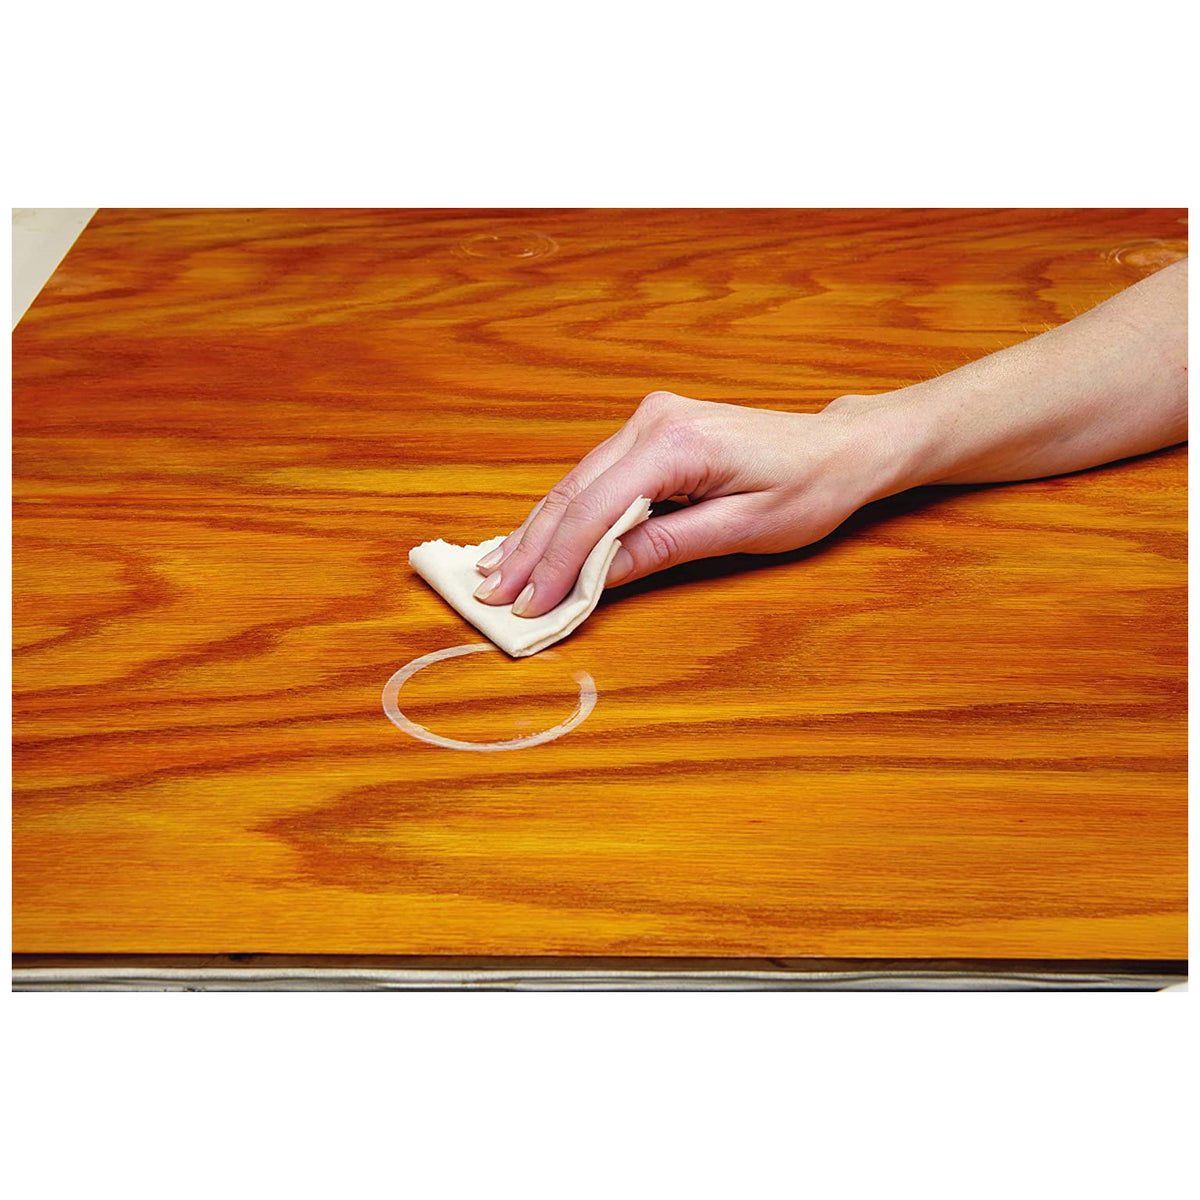 Guardsman 405200 Ring & Water Mark Remover Cloth for Wood Furniture, 5.75" x 11"